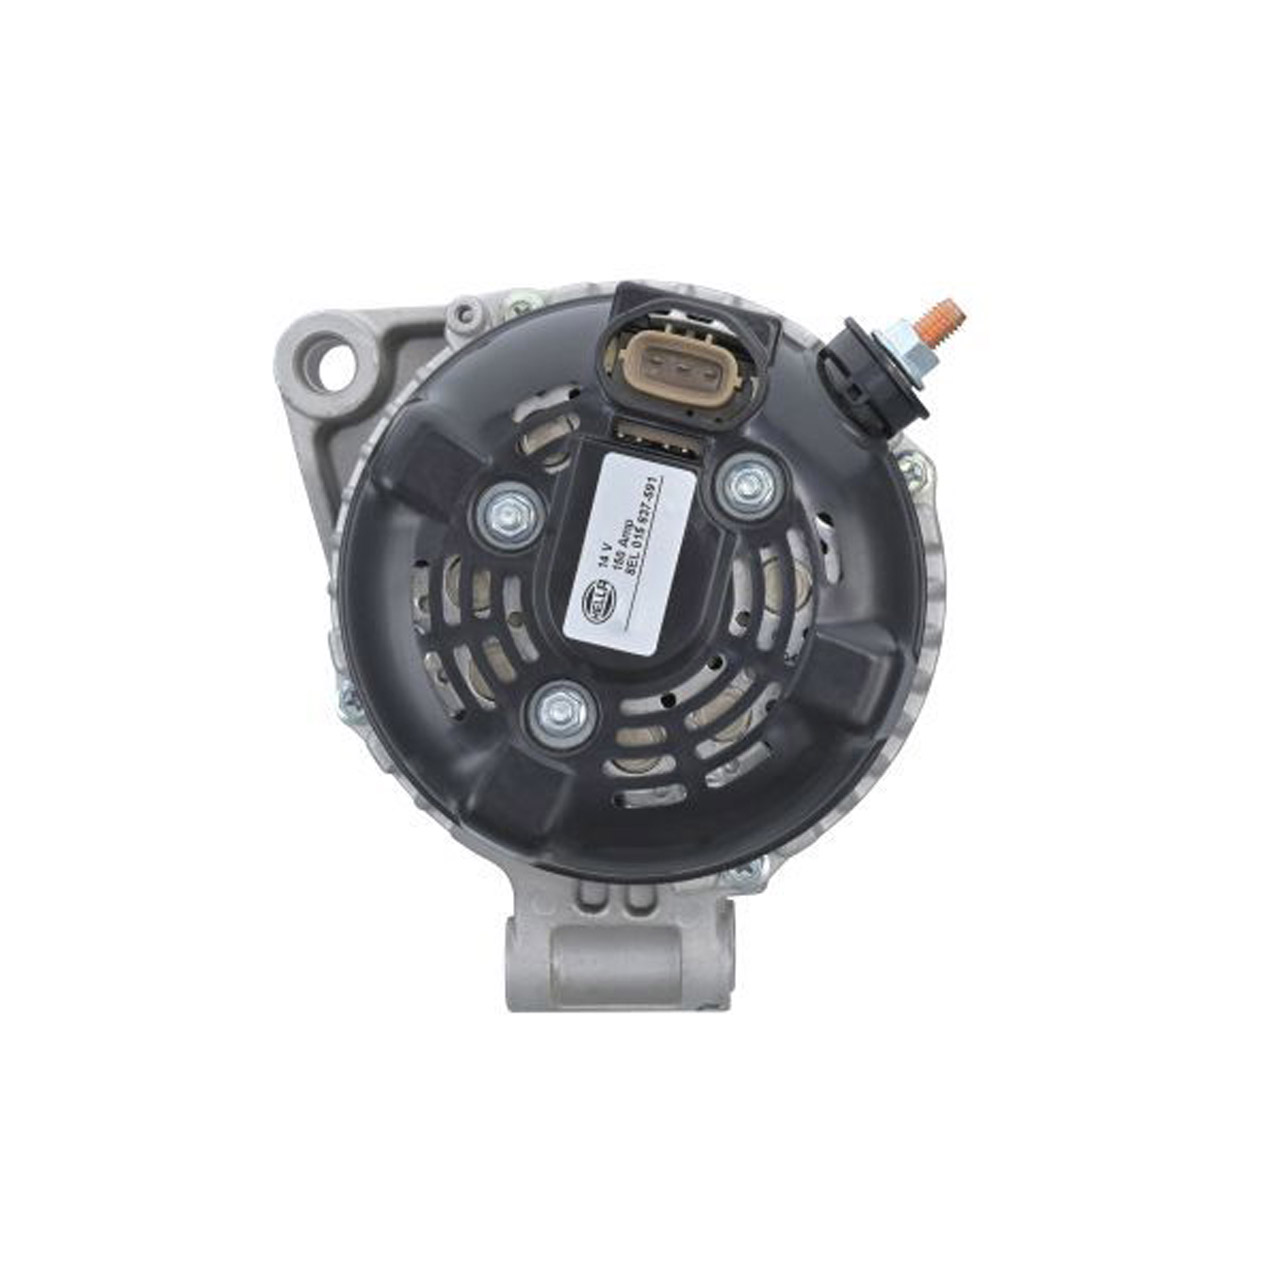 HELLA 015637-591 Lichtmaschine Generator 14V 150A LAND ROVER Discovery 4 L319 2.7 TD